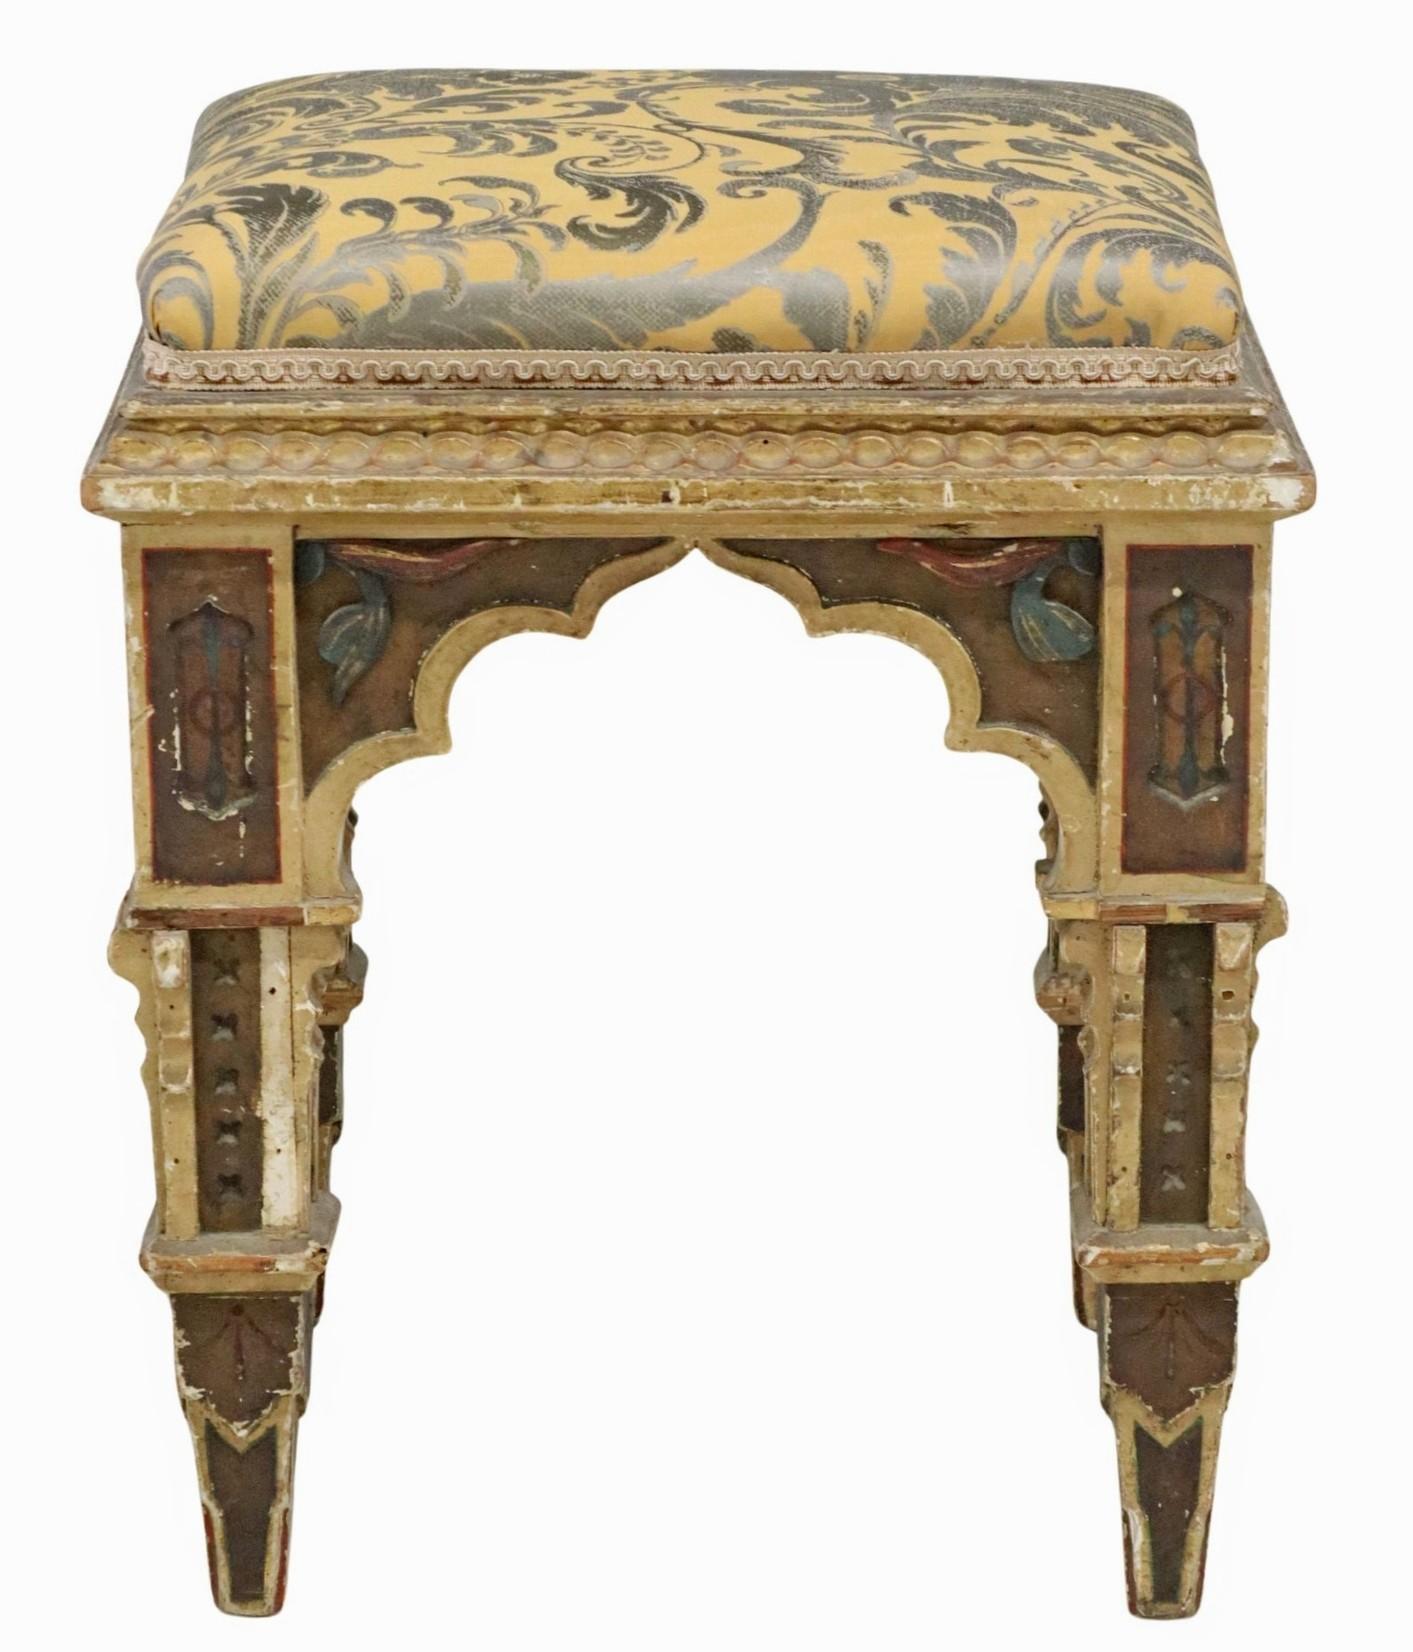 A magnificent Neo-Gothic tabouret stool / ottoman, 19th century, most likely Italian (Southern Italy; Kingdom of Two Sicilies), parcel gilt and polychrome painted frame, padded seat in later upholstery, on tapering square legs. 

Provenance /